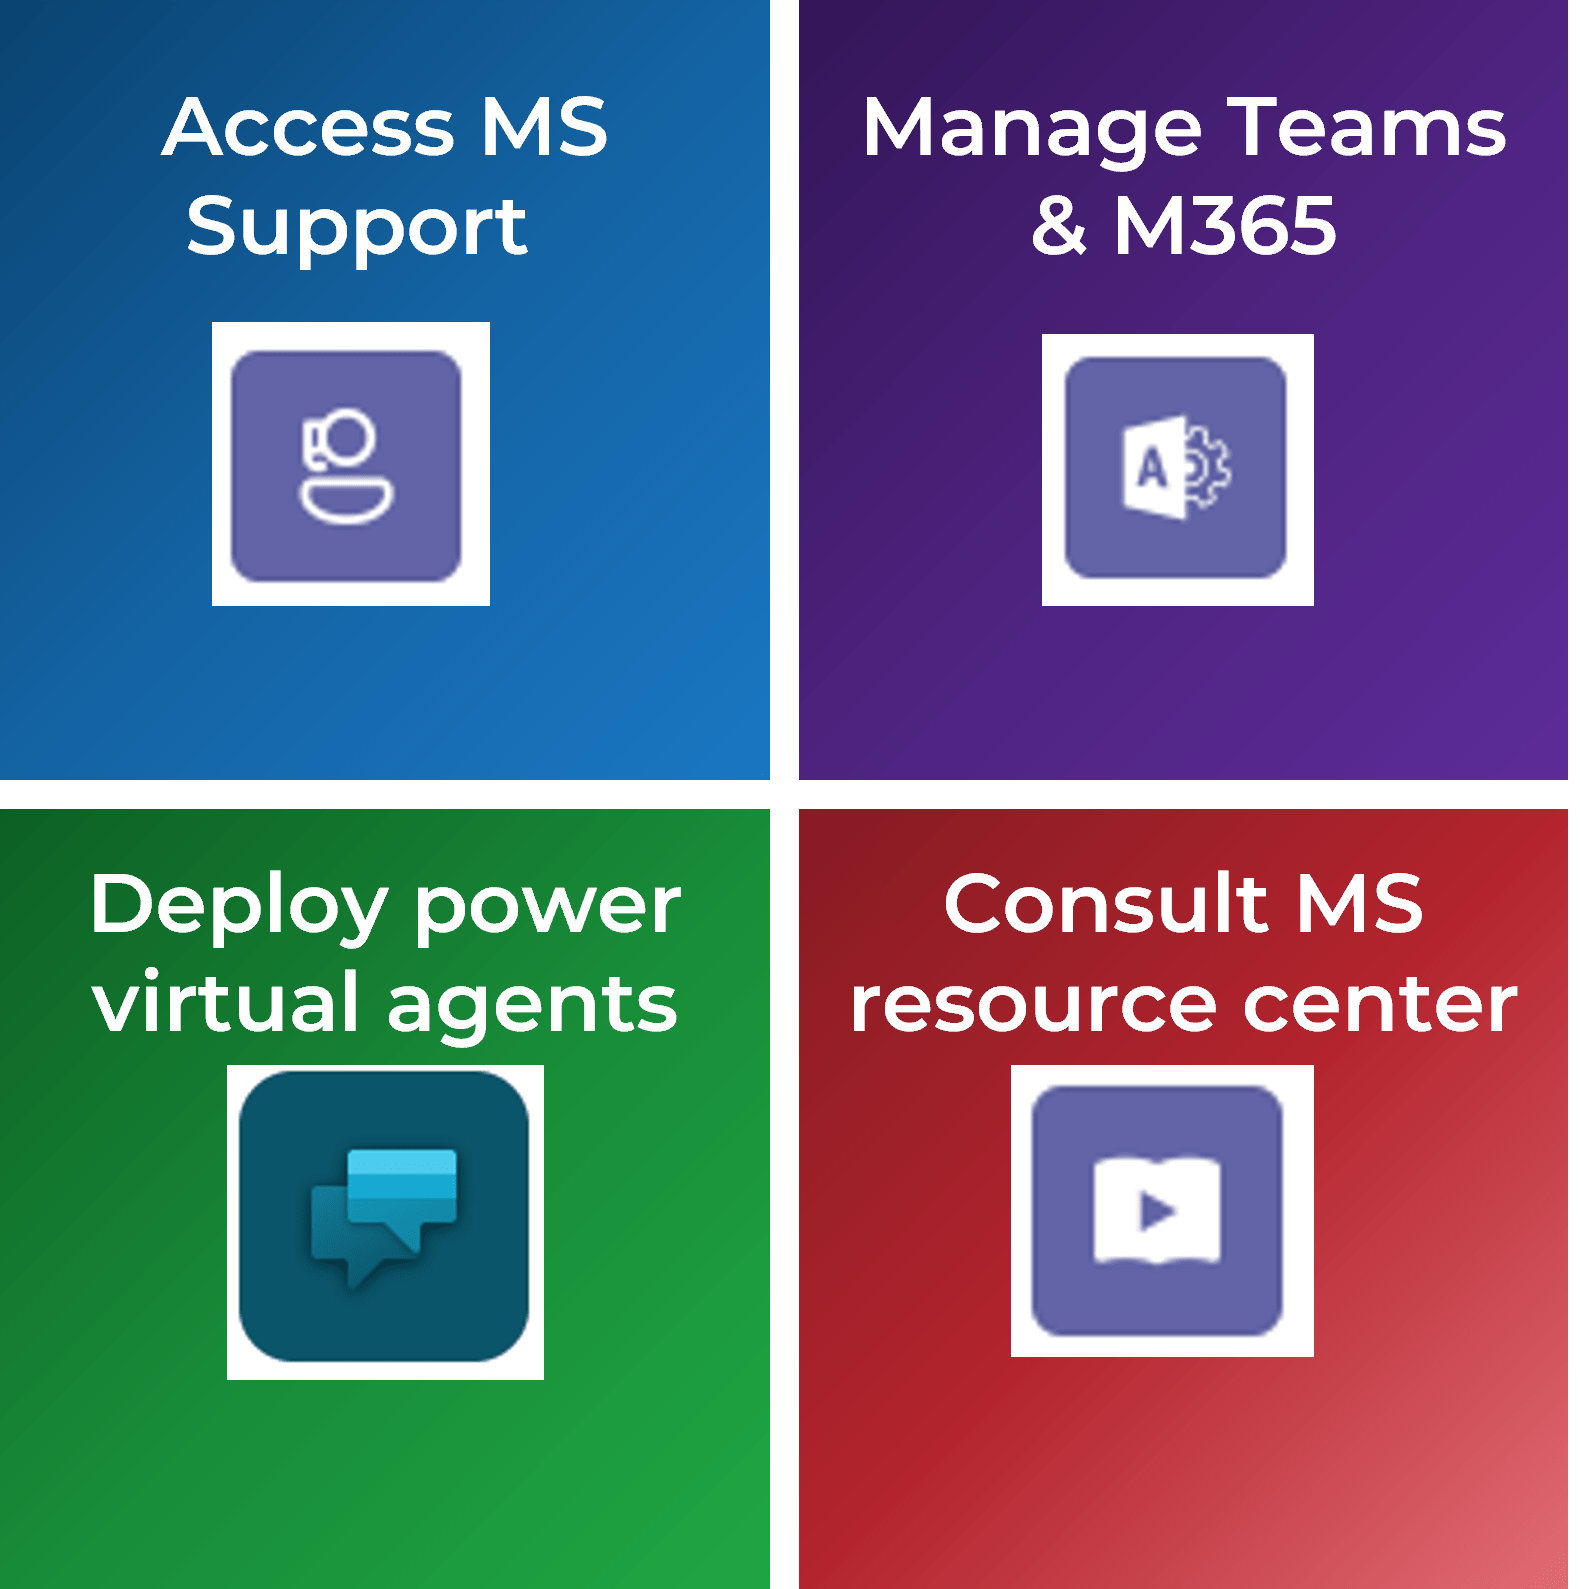 Samples of four features: 'Access MS Support', 'Manage Teams & M365', 'Deploy power virtual agents', and 'Consult MS resource center'.